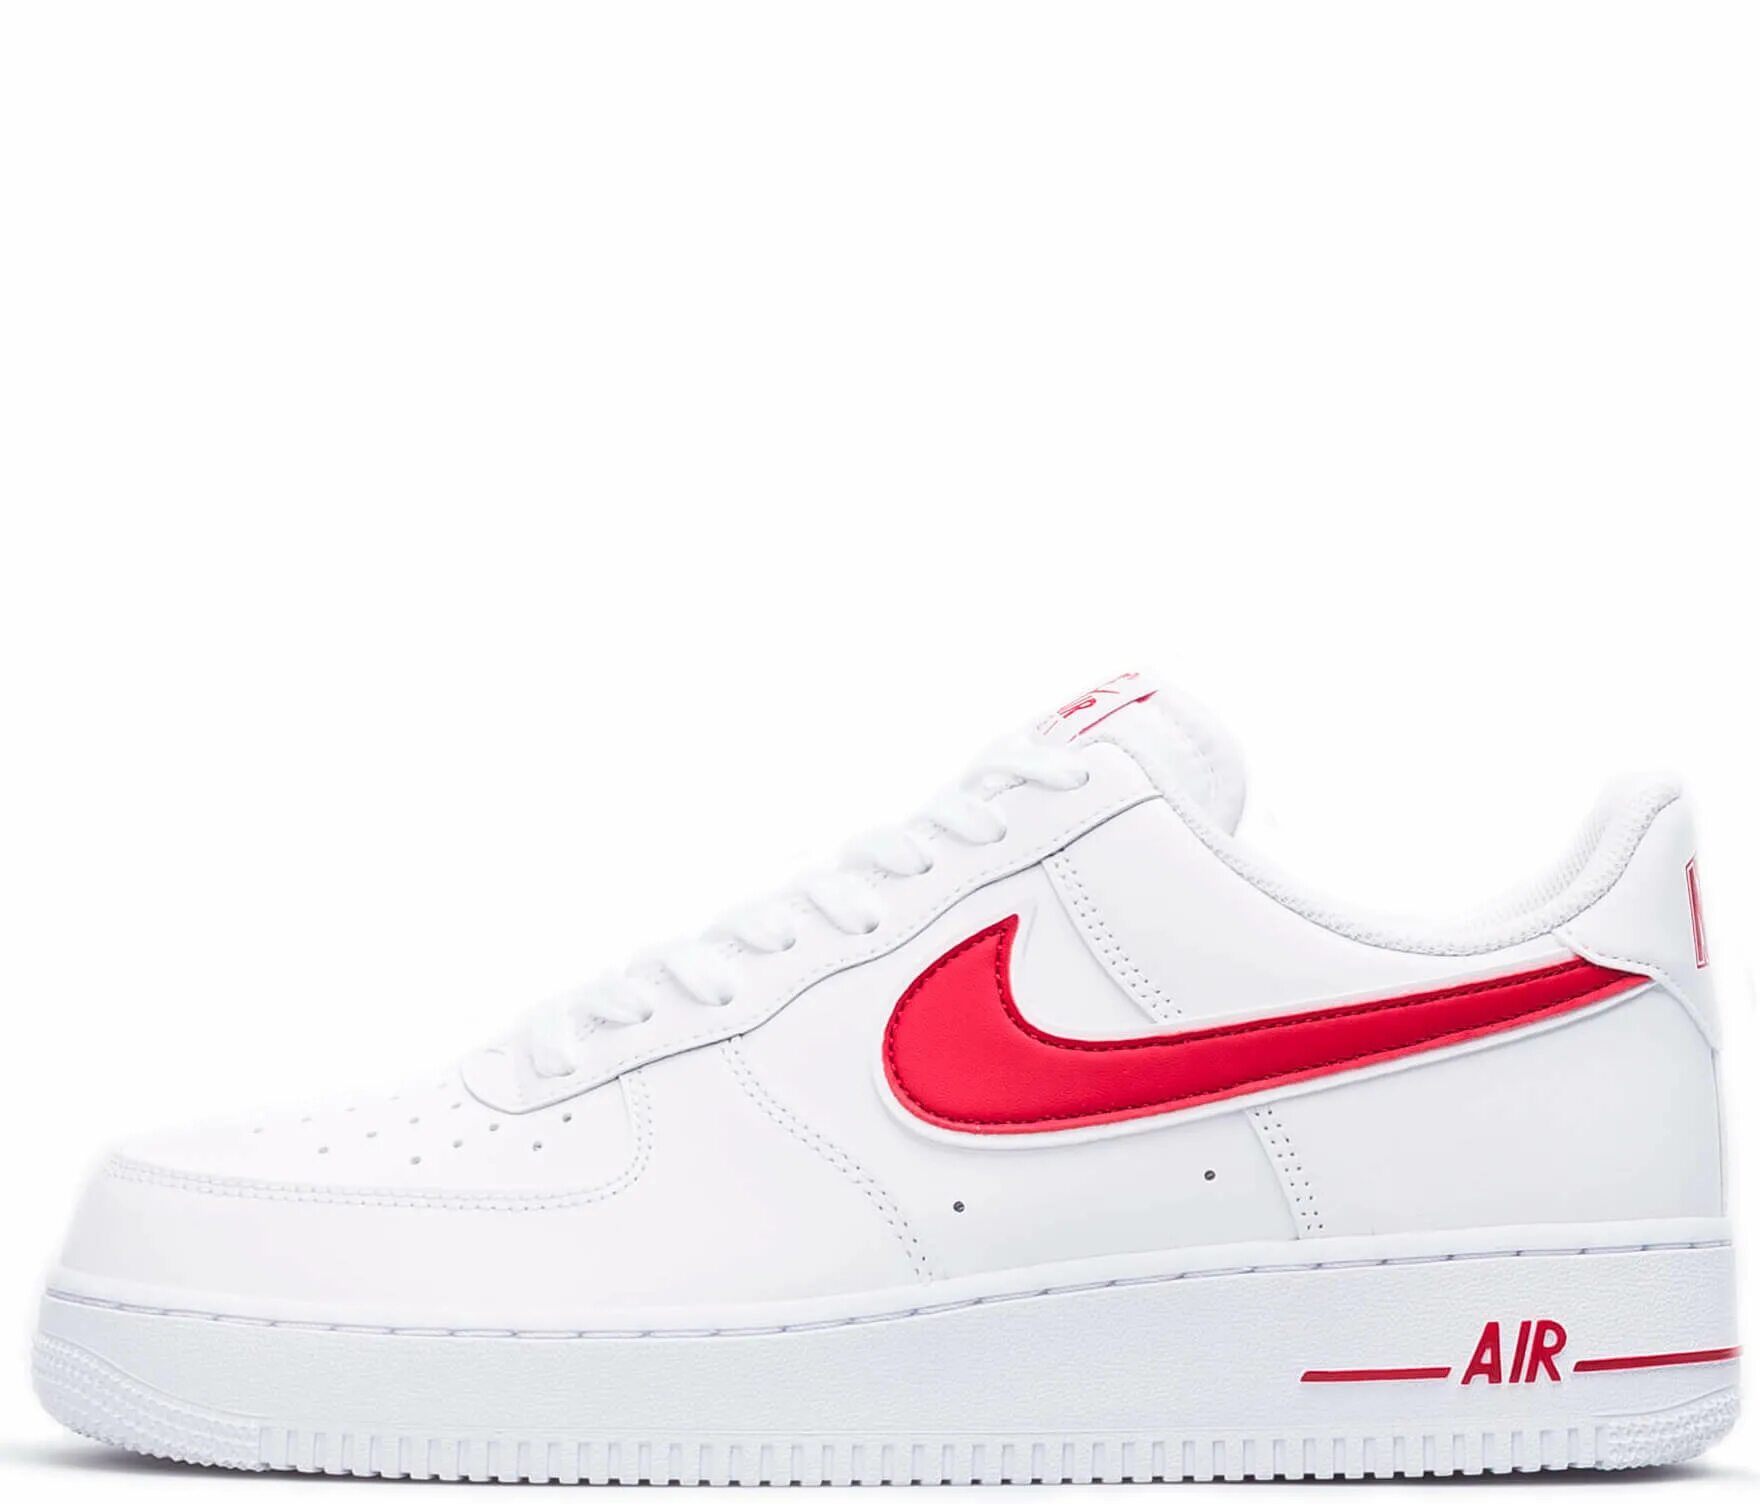 Nike Air Force 1 Low White Red. Nike Air Force 1 lv8 White/Red. Nike Air Force 1 White Red. Nike Air Force 1 lv8 White. Кроссовки nike force 1 lv8